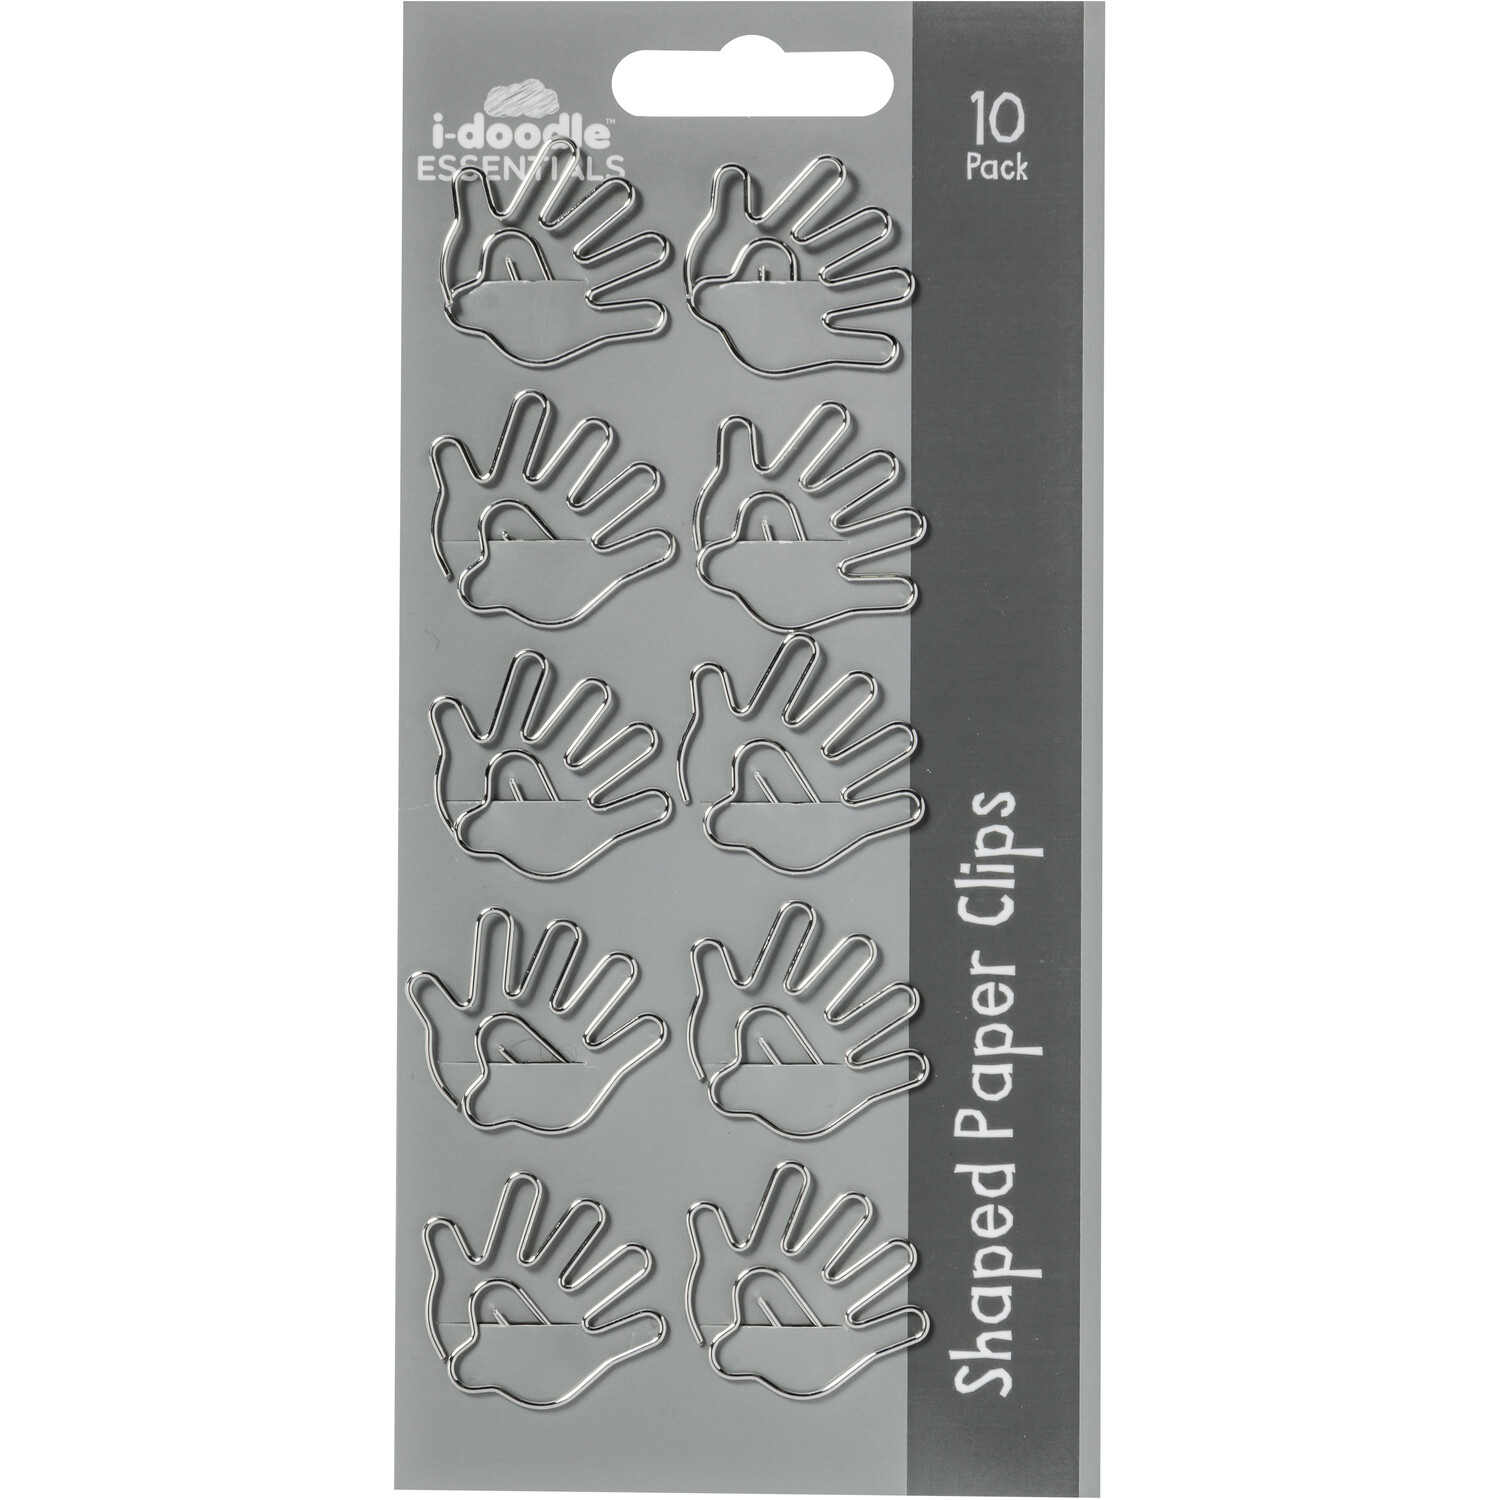 Pack of Ten Shaped Paper Clips Image 1